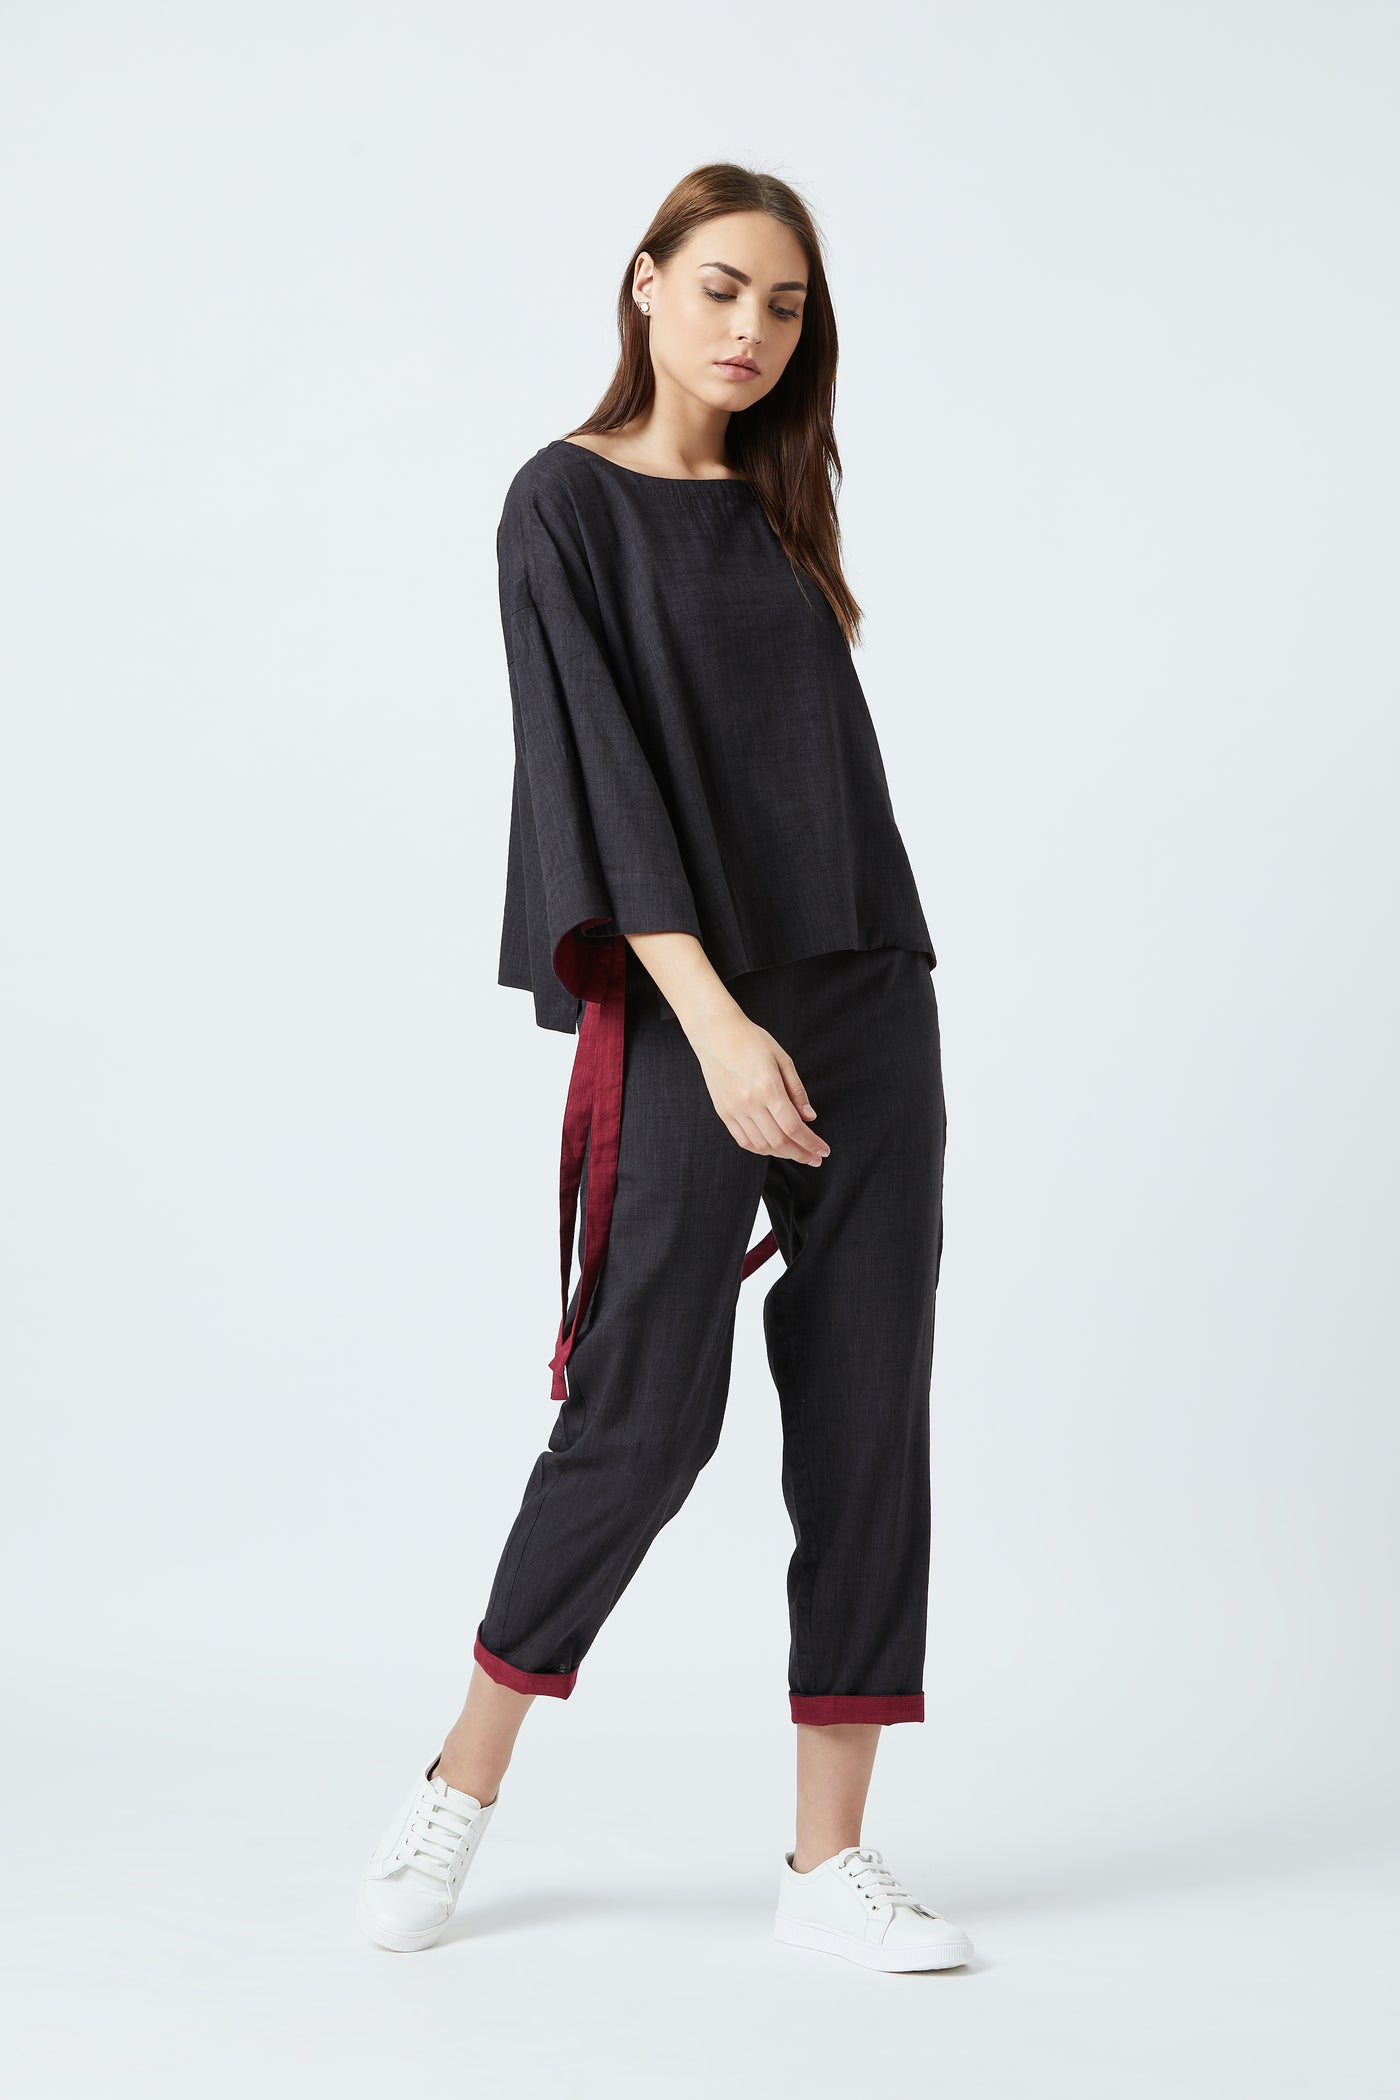 Loose fit black ankle pants with red detailing on the cuffs.